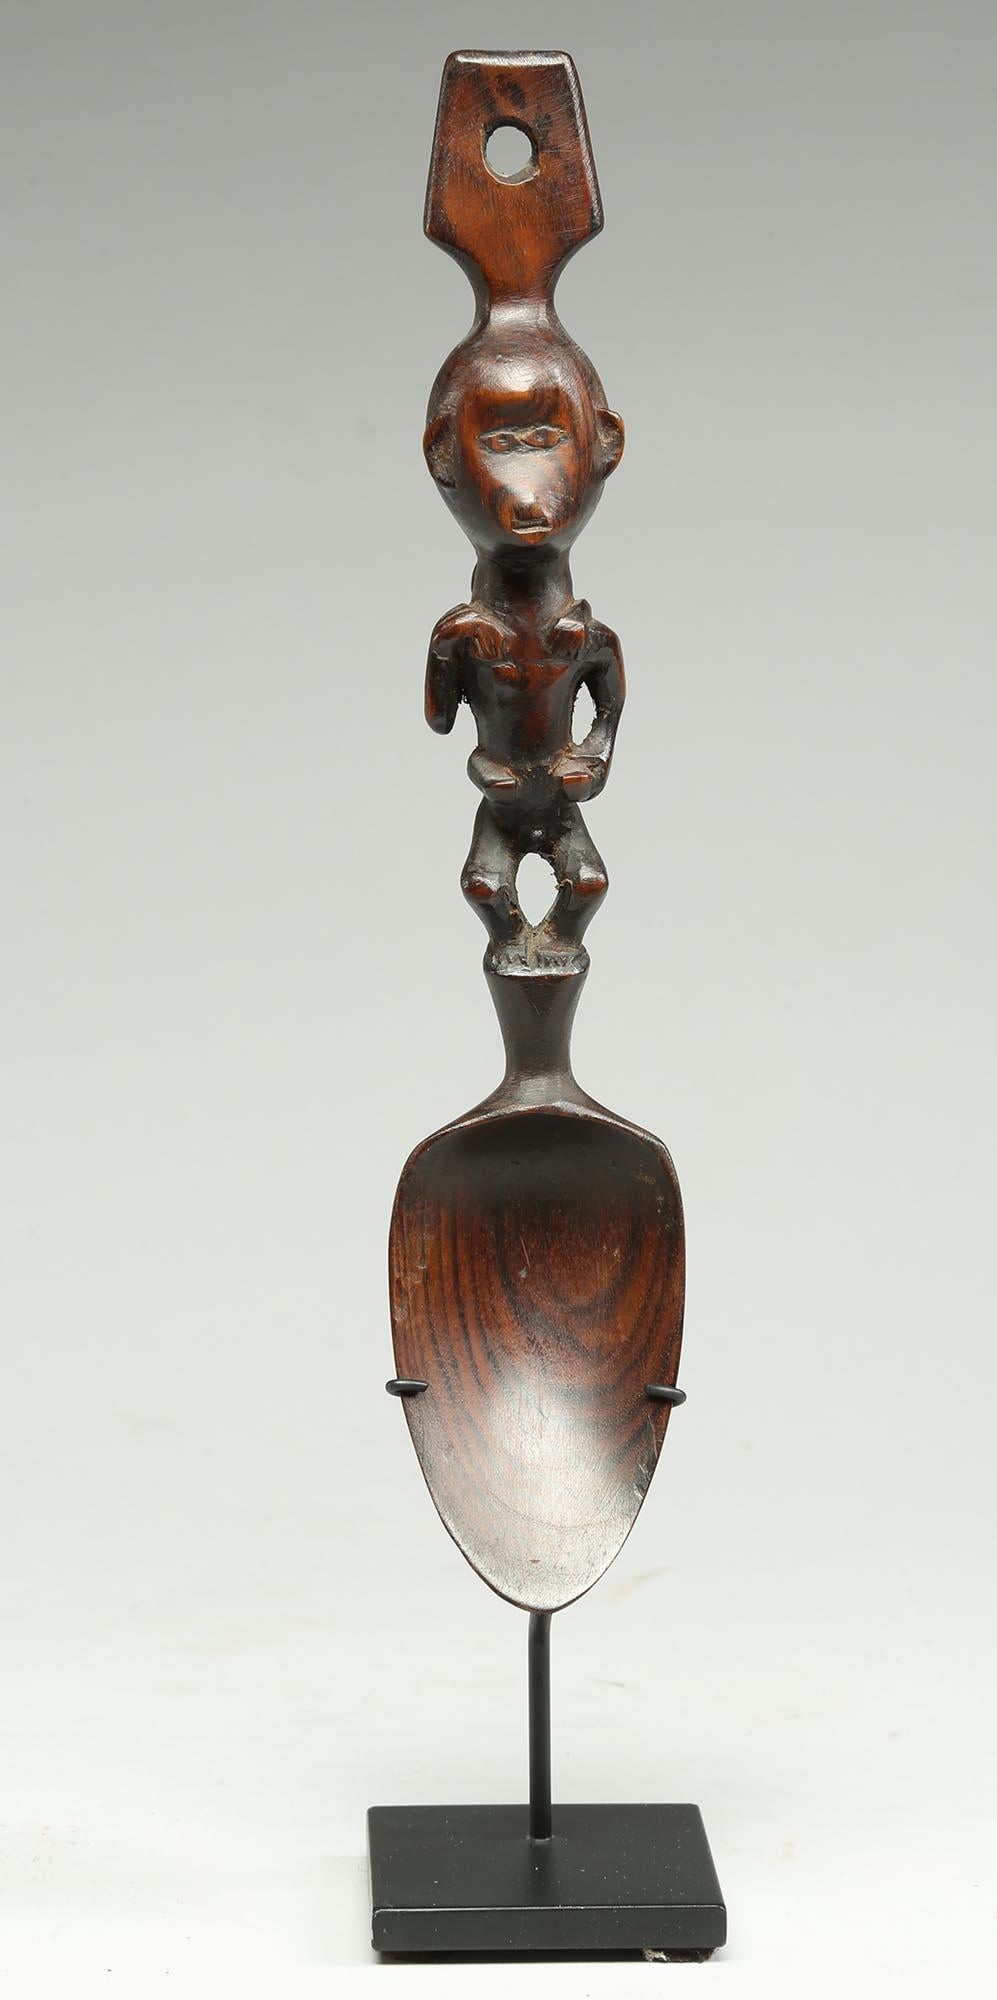 Tribal Old worn Philippine Spoon with Monkey Maternity Mother Figure with Baby on Back